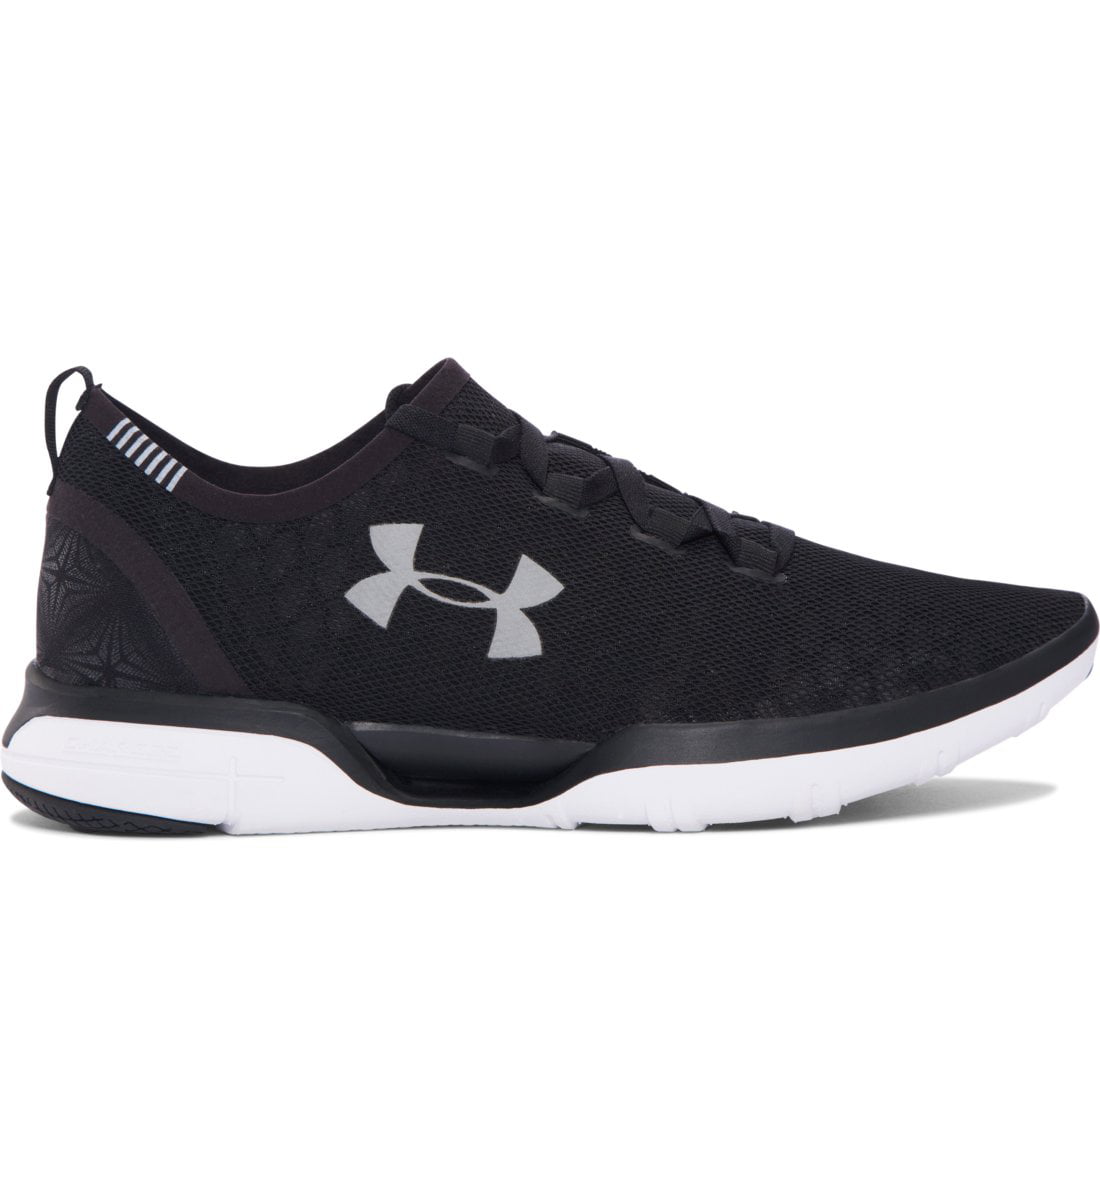 Under Armour Charged Cool Switch Run 